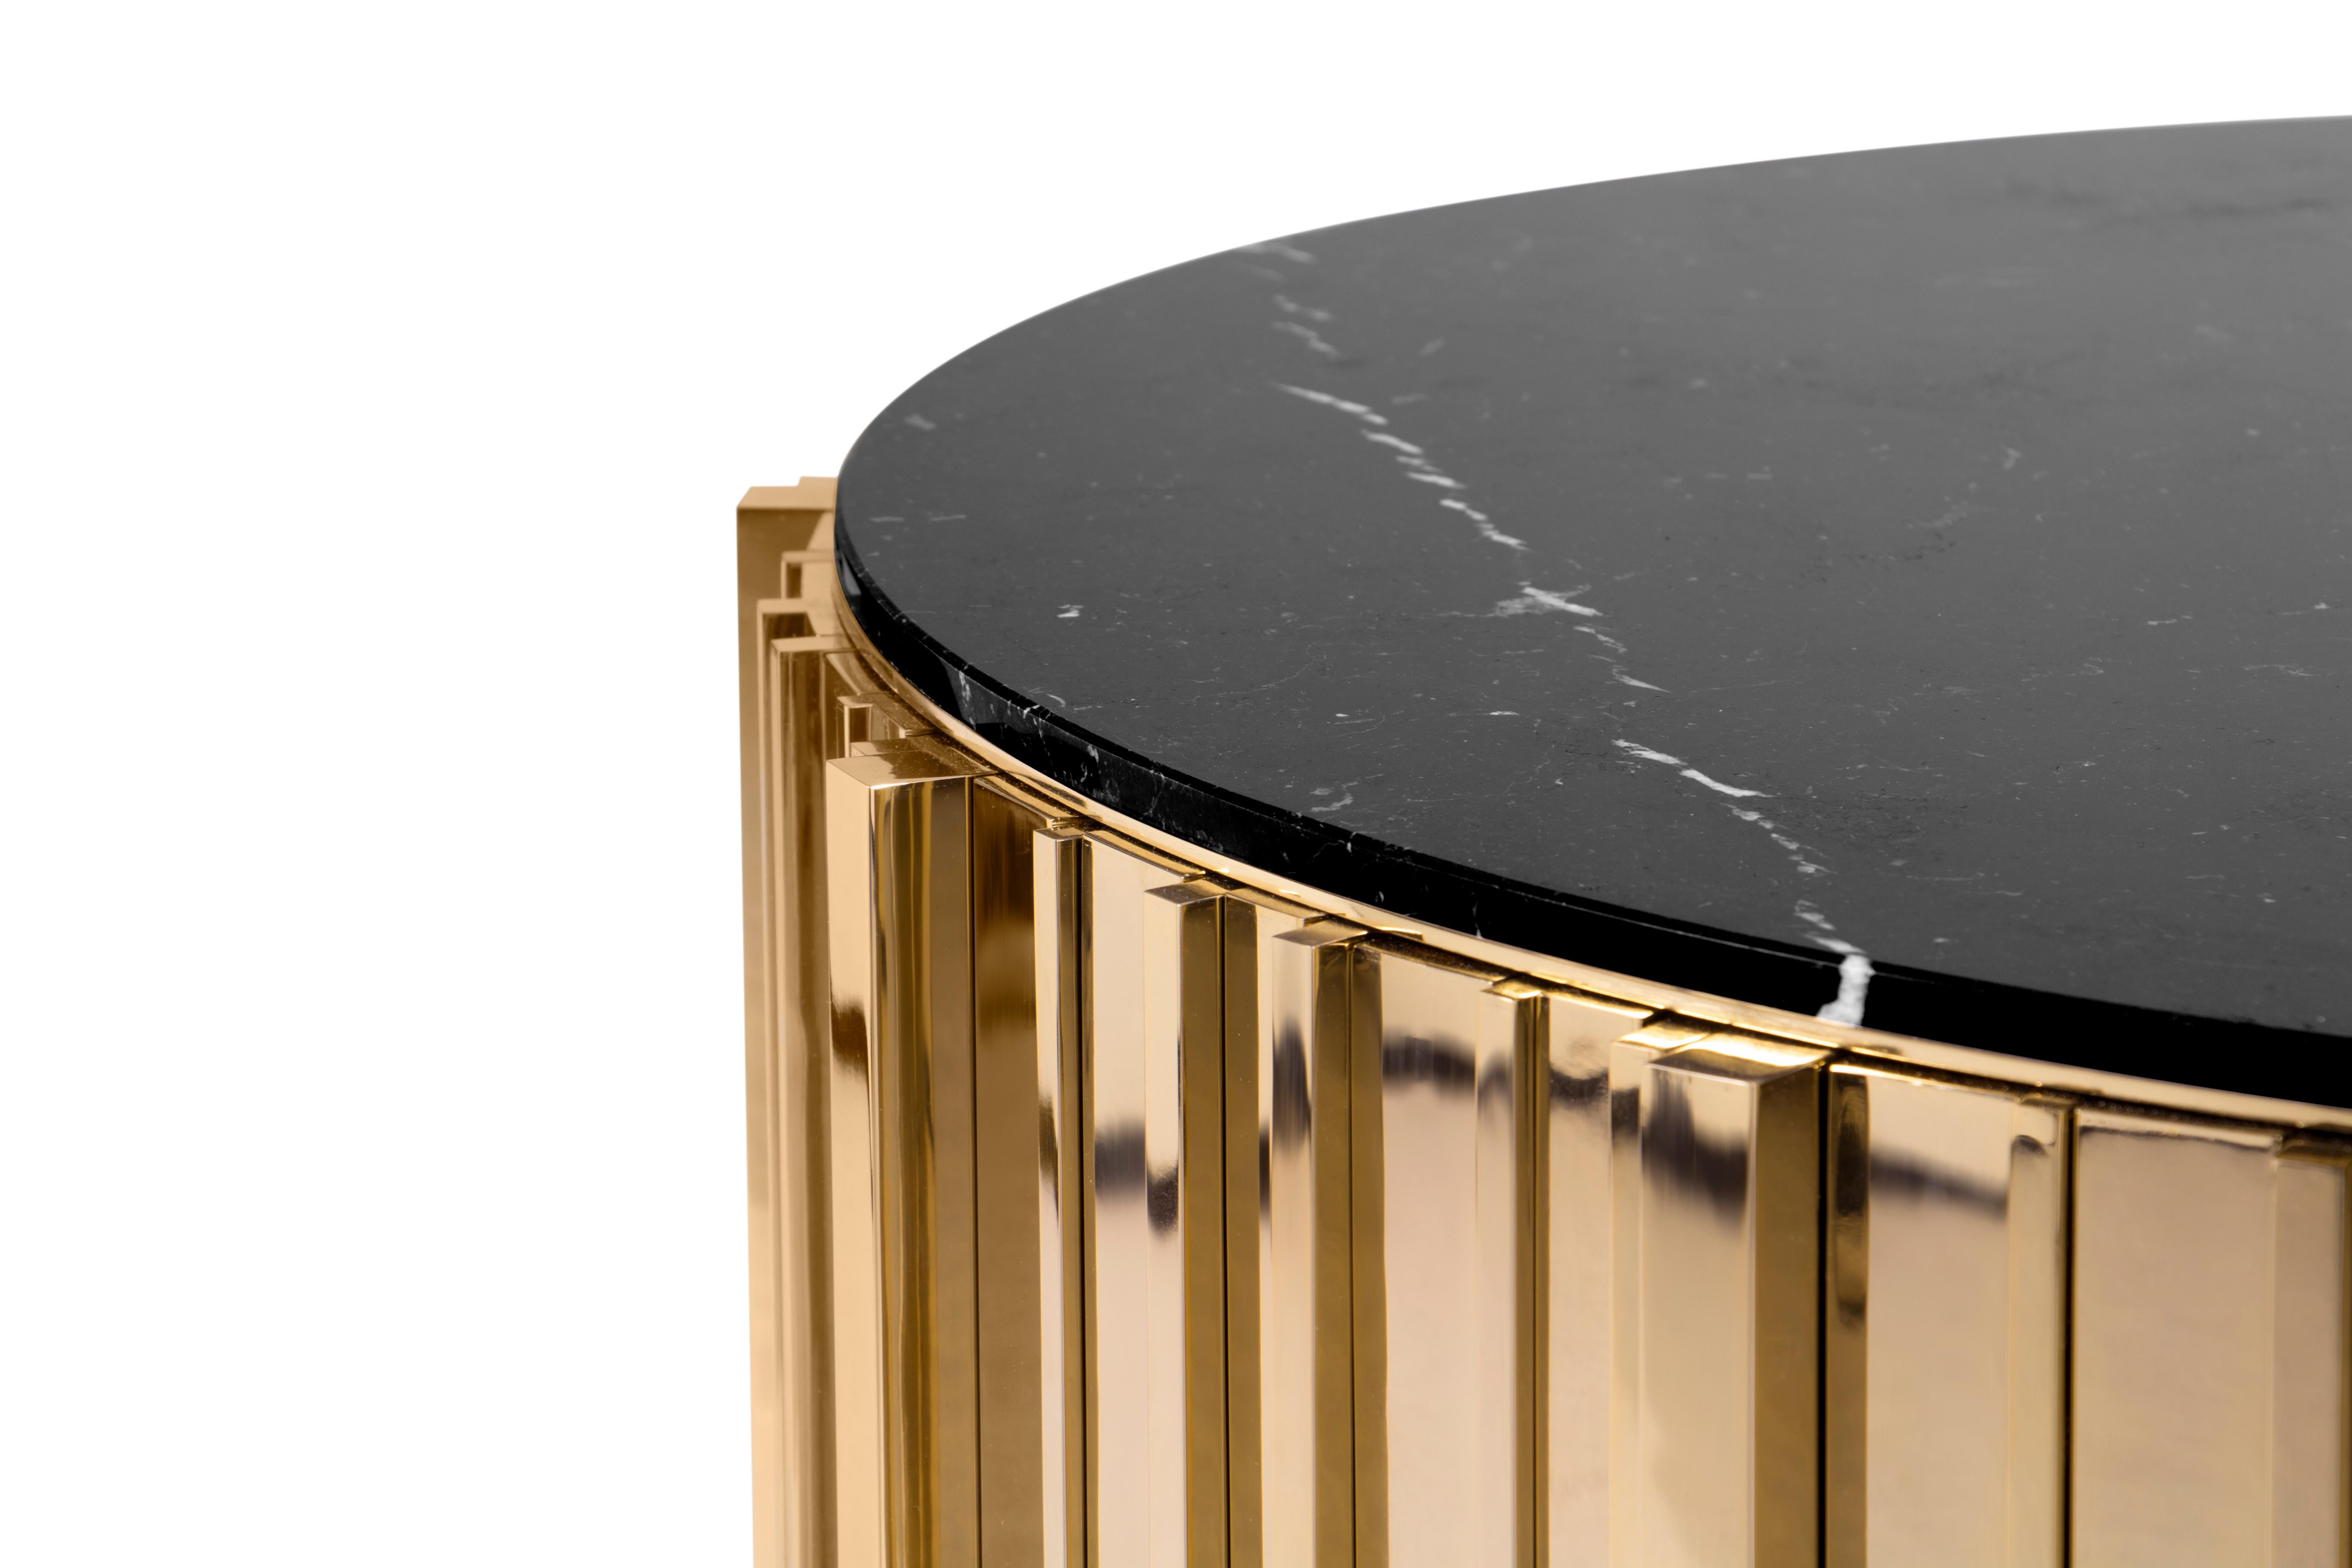 nero marquina marble coffee table